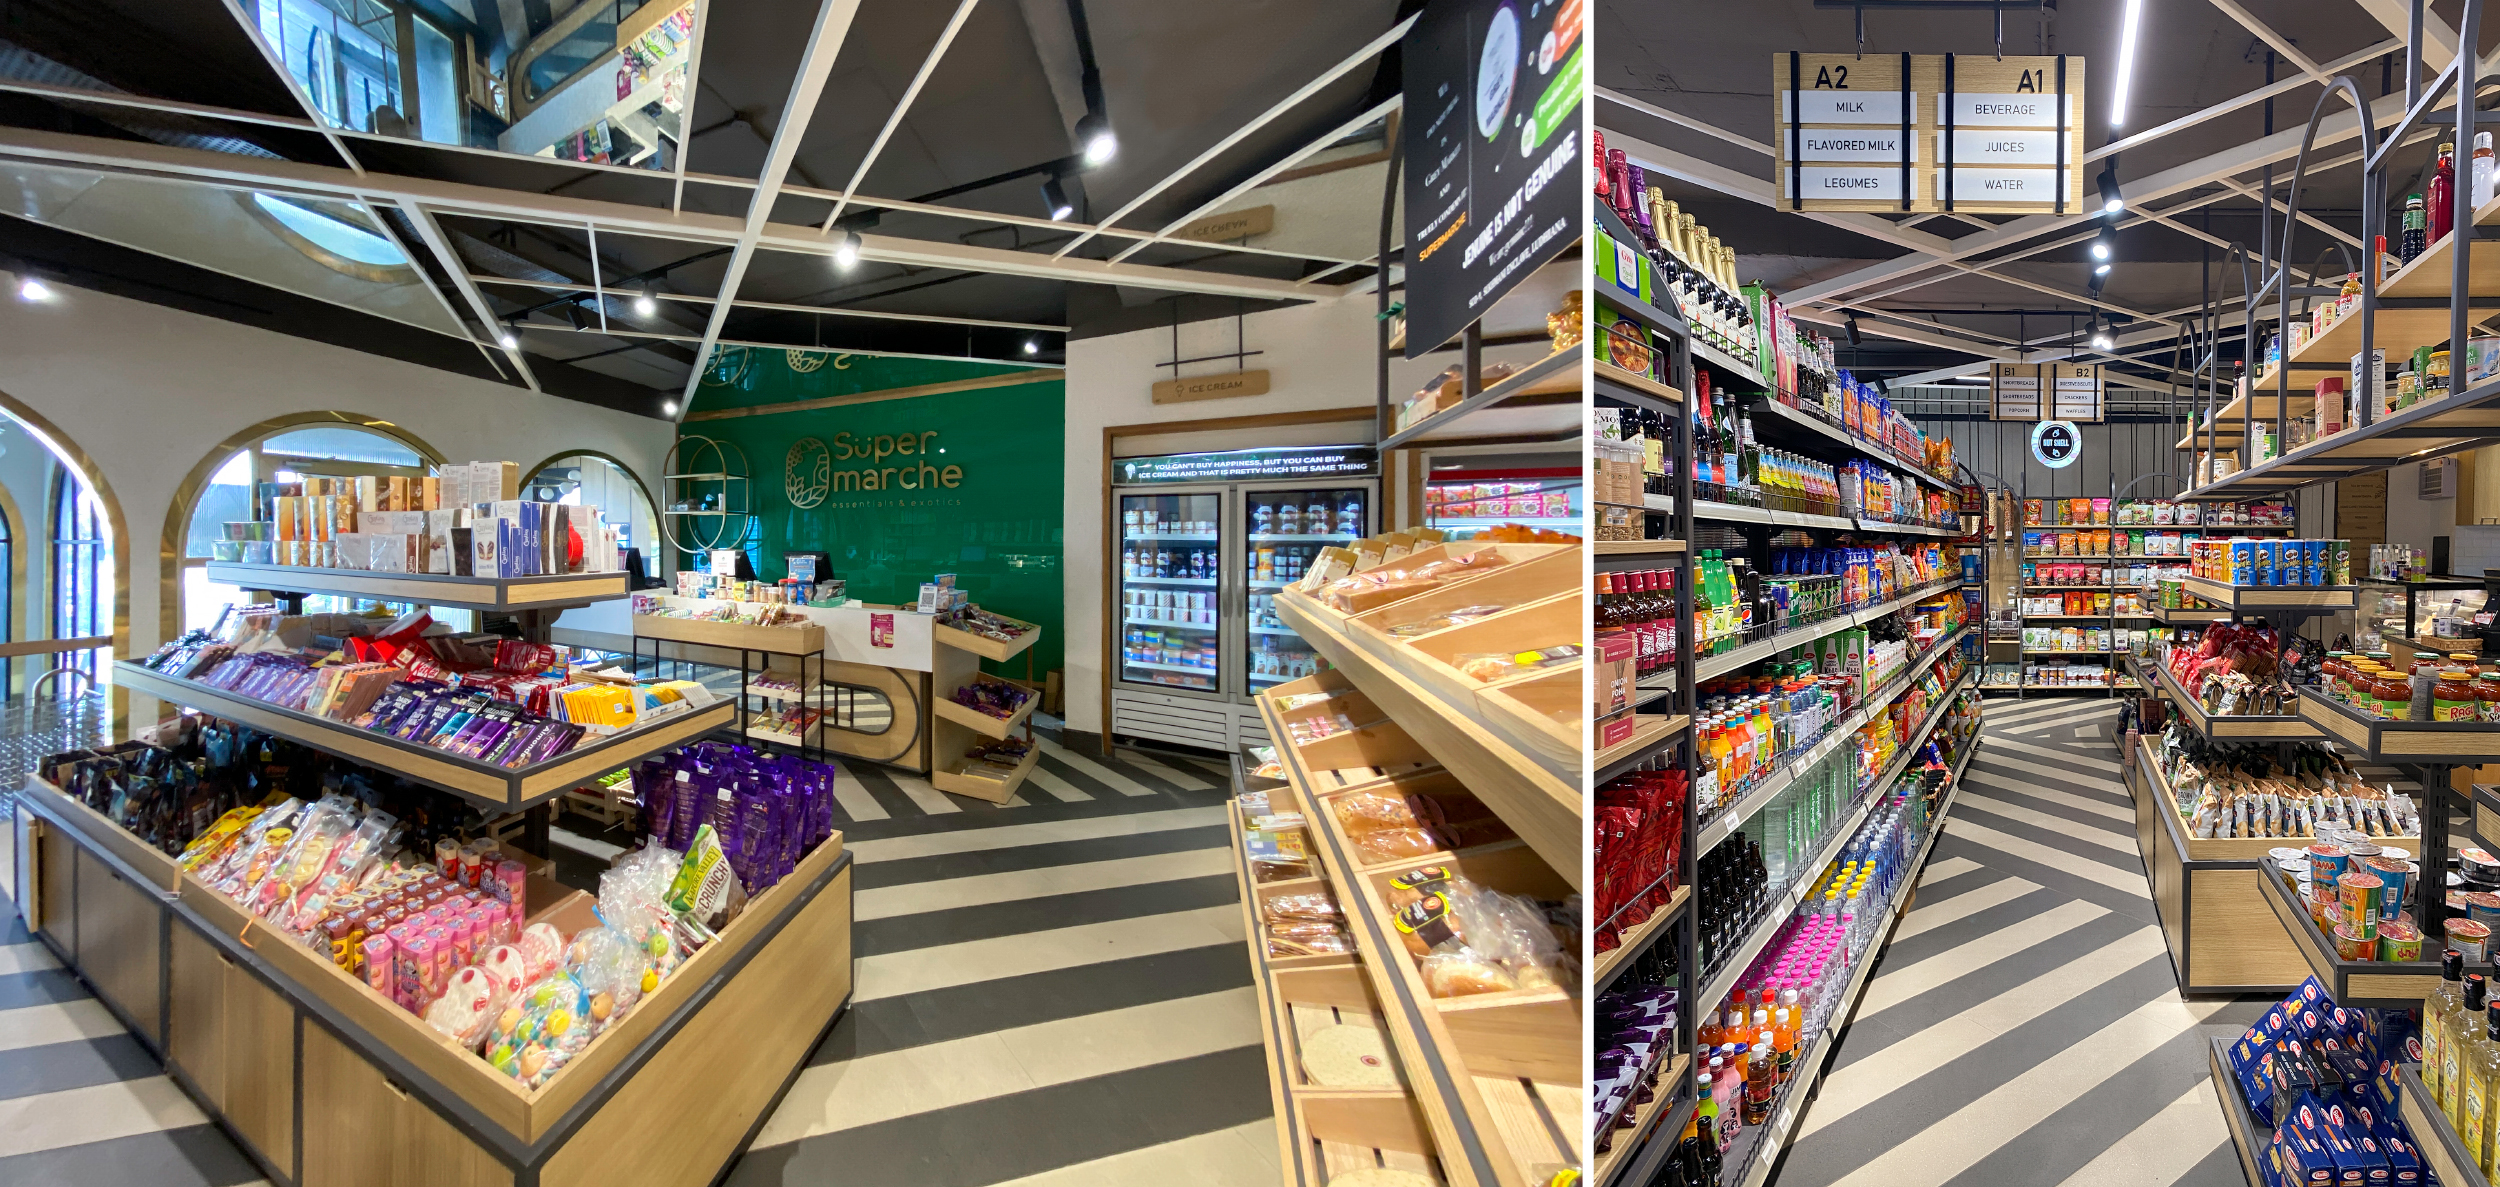 3 Upscale Supermarkets That Change the Way We Think About Grocery Store Design